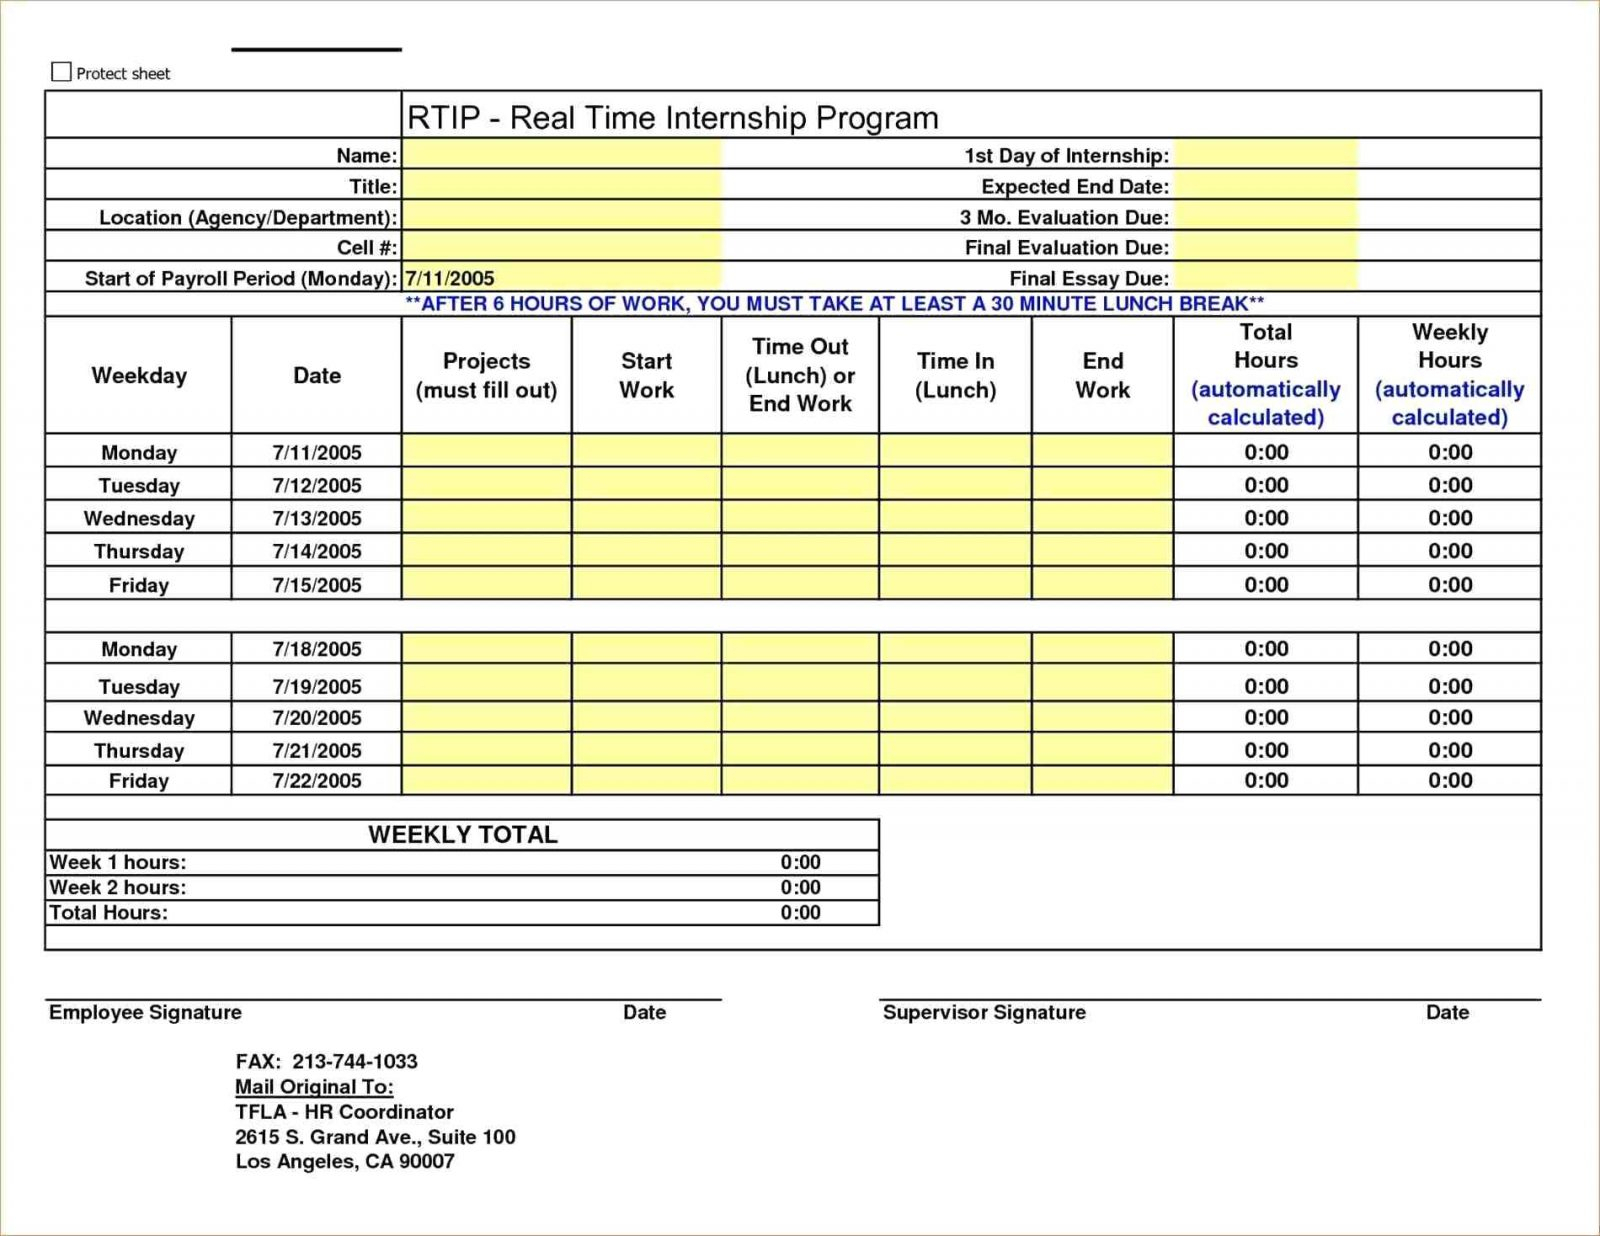 Paid Time Off Tracking Spreadsheet 2 Spreadsheet Downloa Paid Time Off